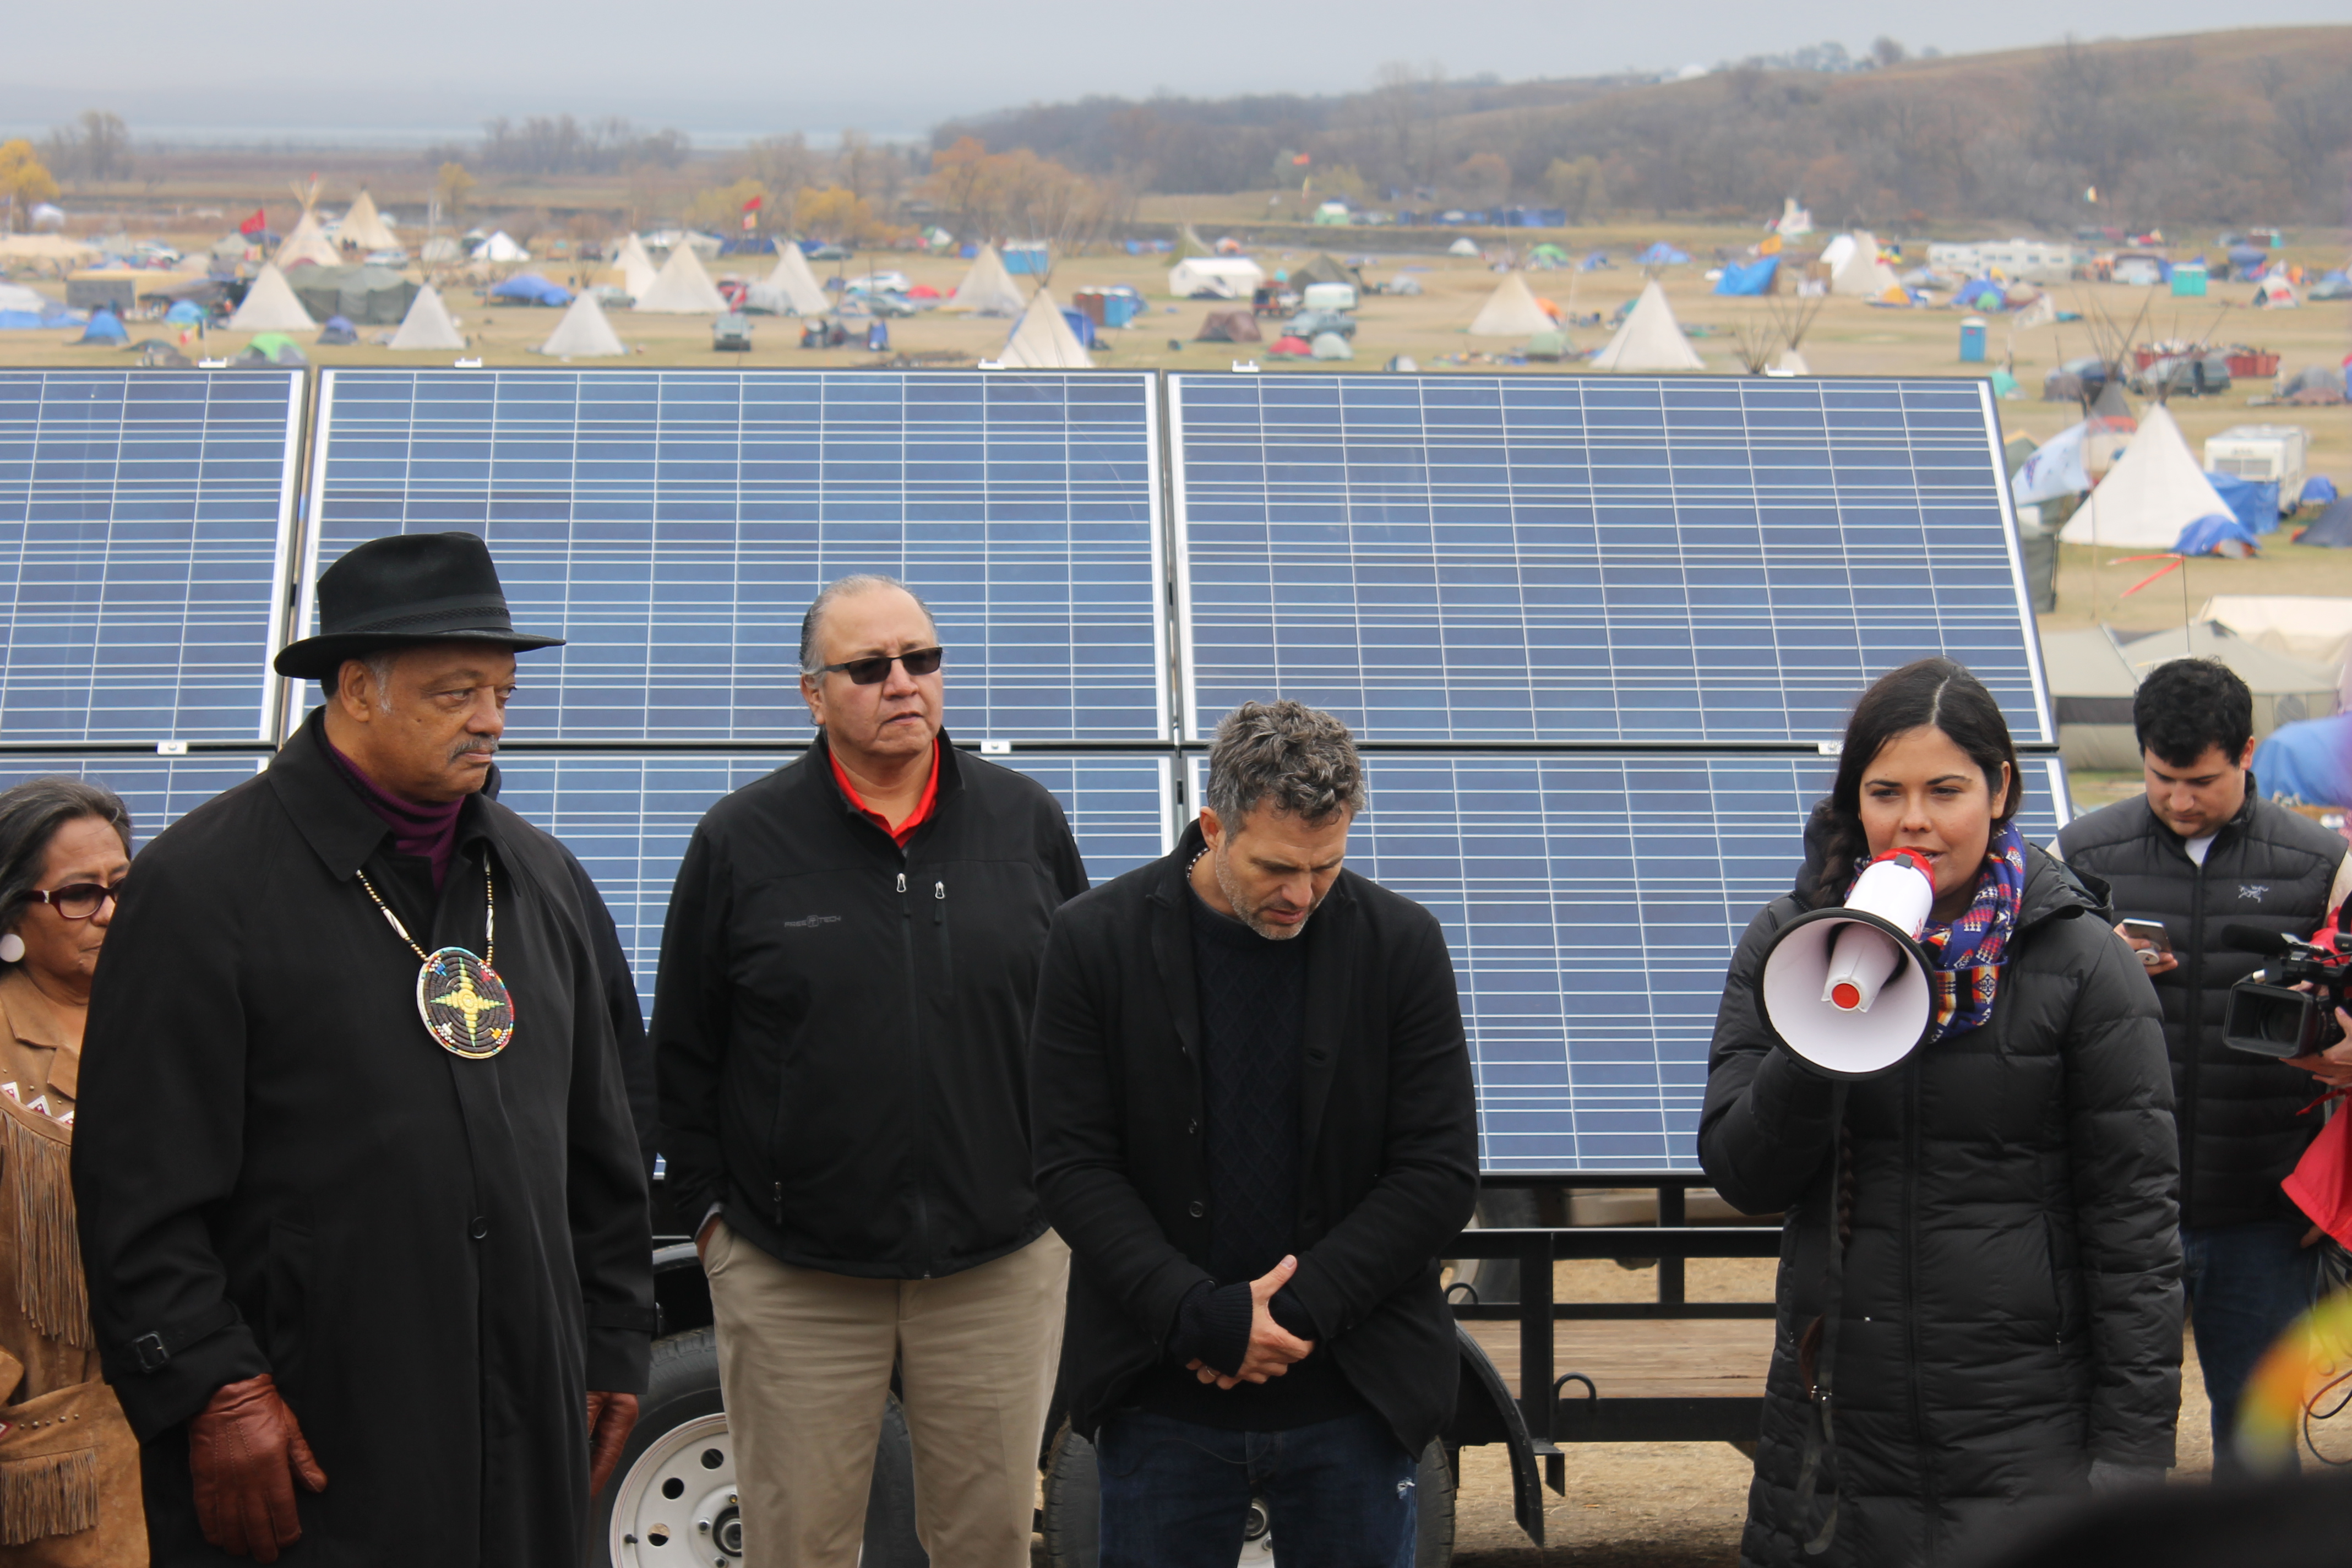 The Rev. Jesse Jackson stands with Mark Ruffalo, actor and co-founder of the Solutions Project, which donated solar panels on trailers to the Standing Rock Sioux tribal elders. Oct. 26, 2016 (Derrick Broze for MintPress)